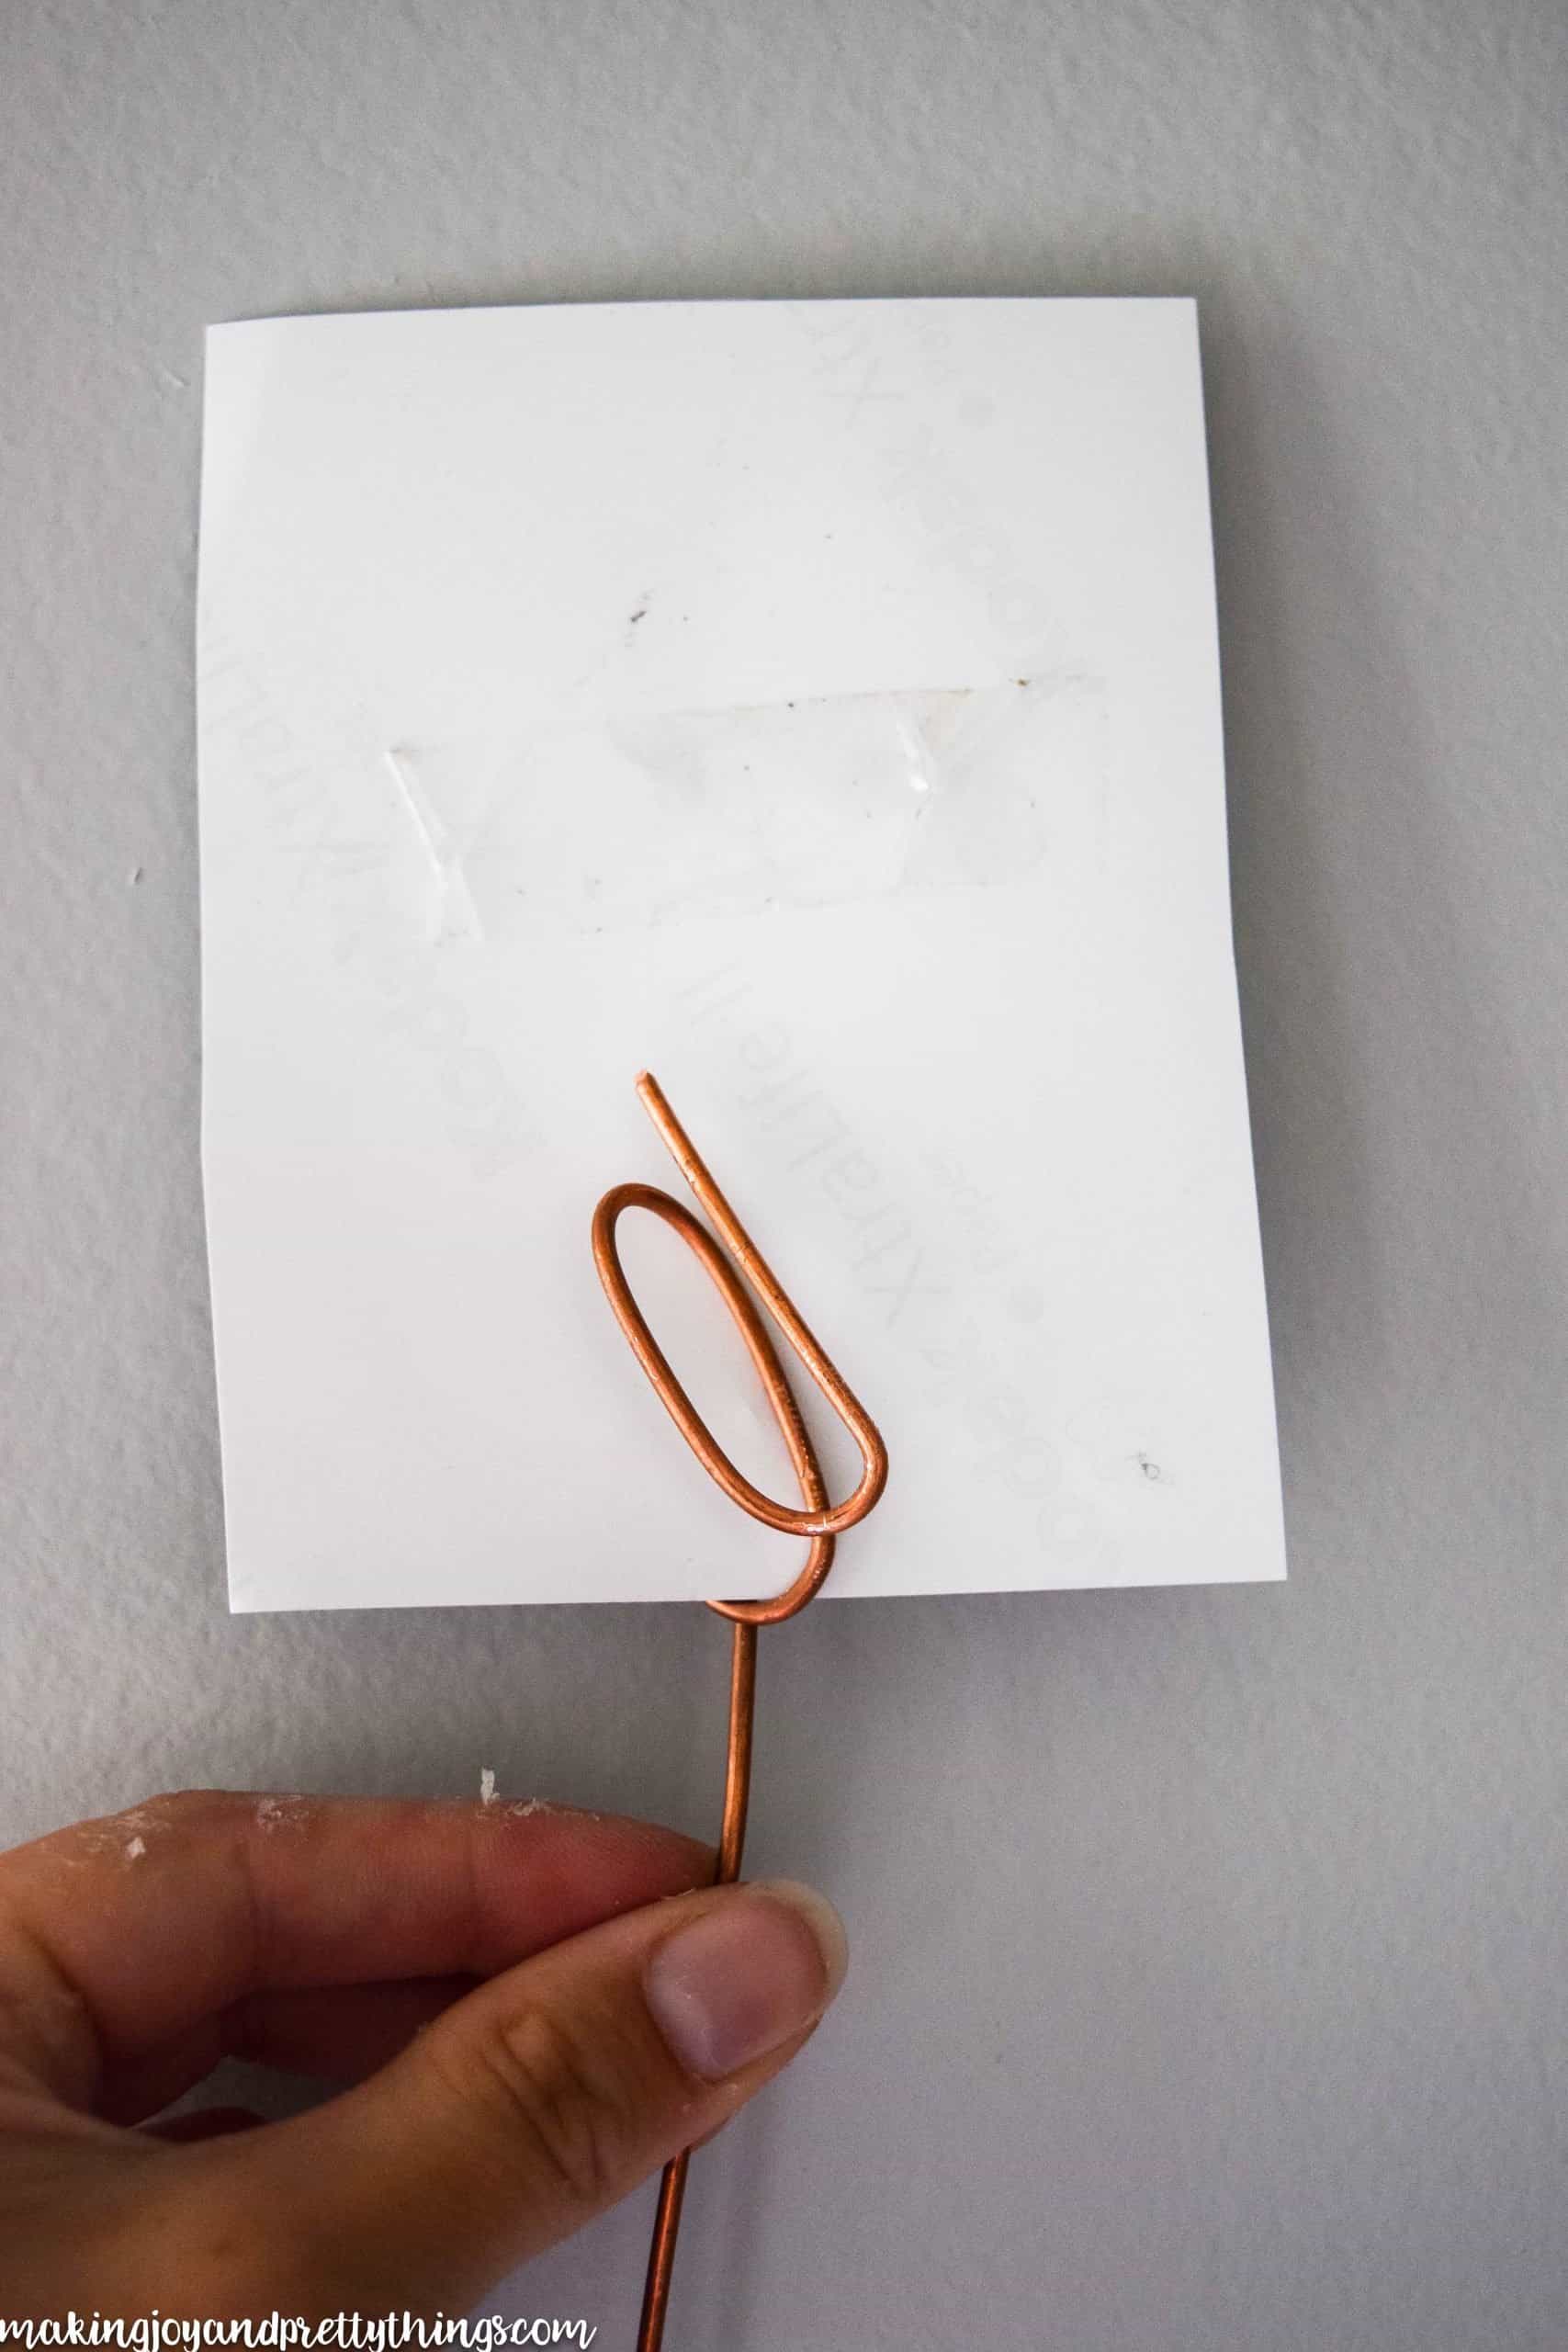 Showing the back of the photo to reveal how the looped copper wire holds the picture